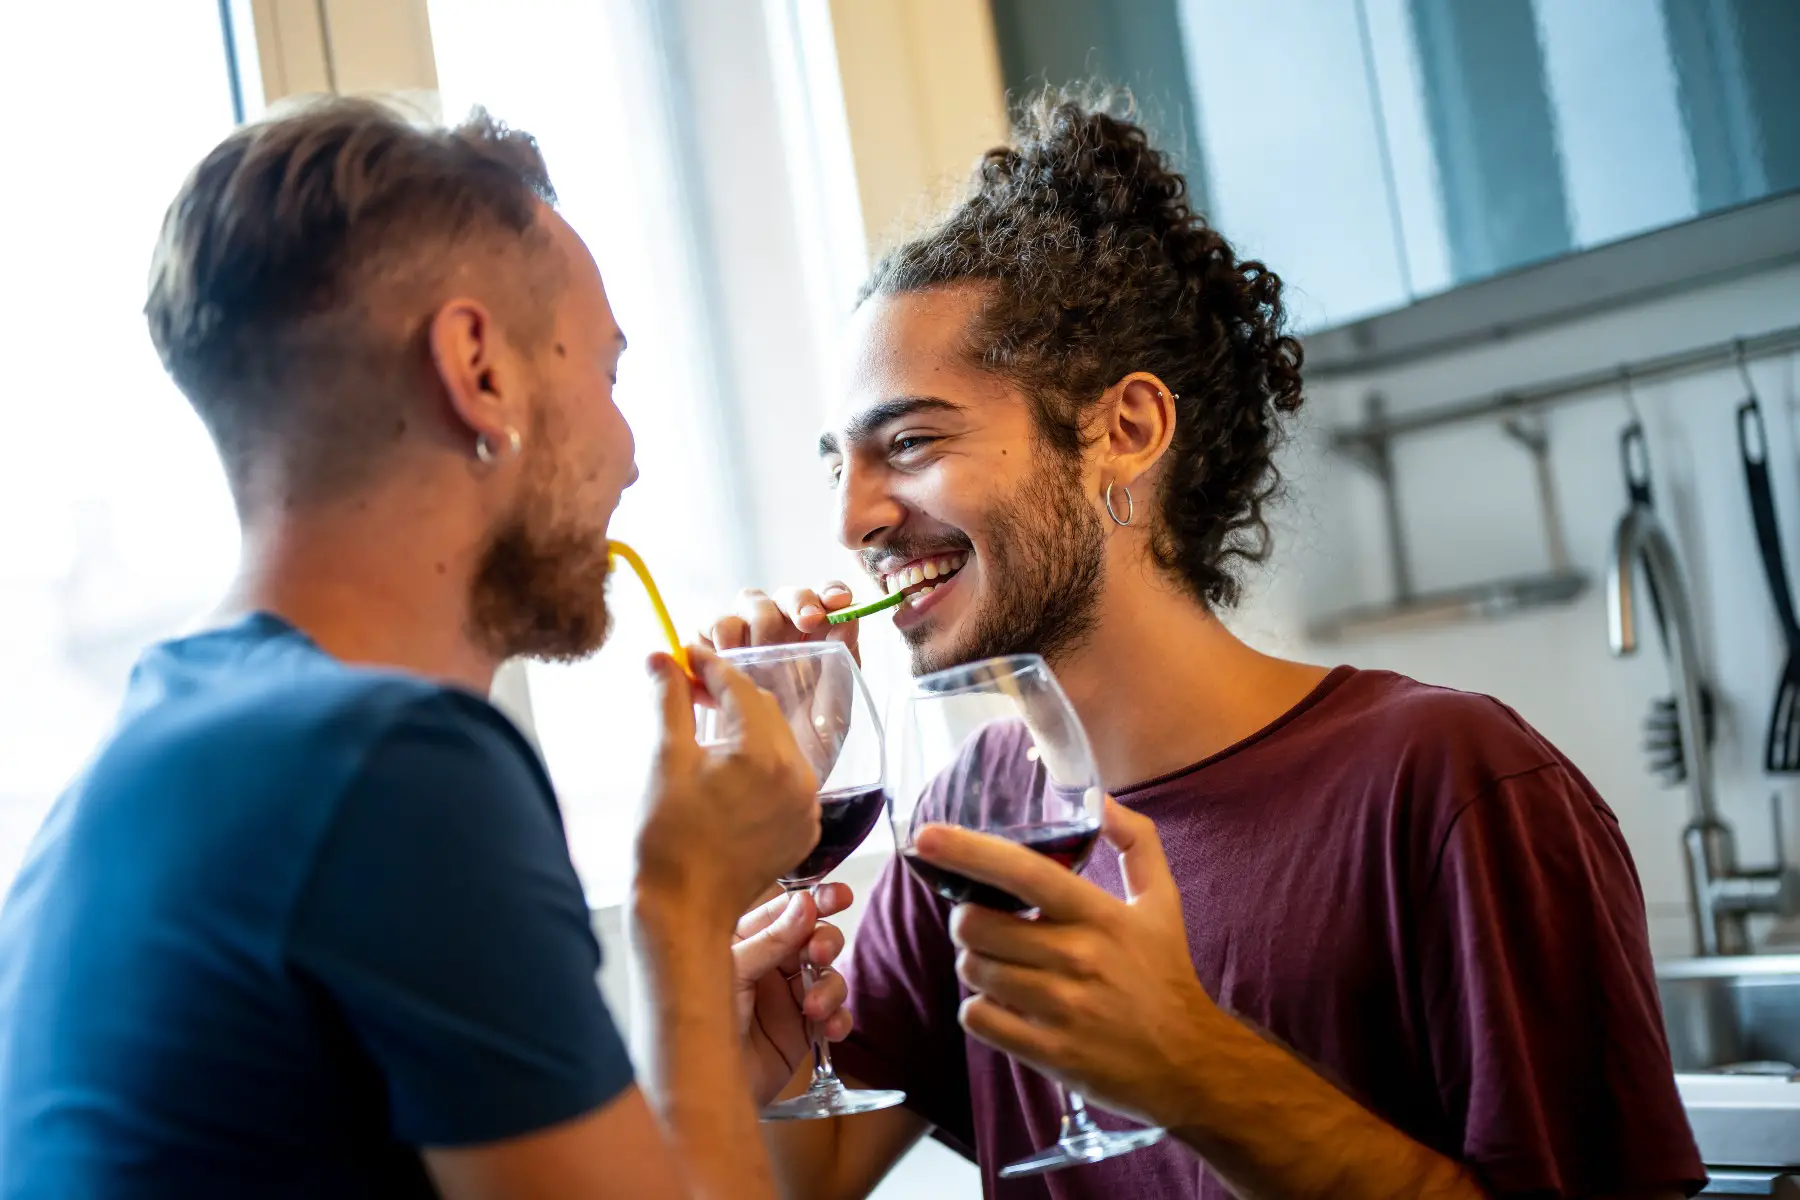 A same-sex couple flirting while drinking red wine